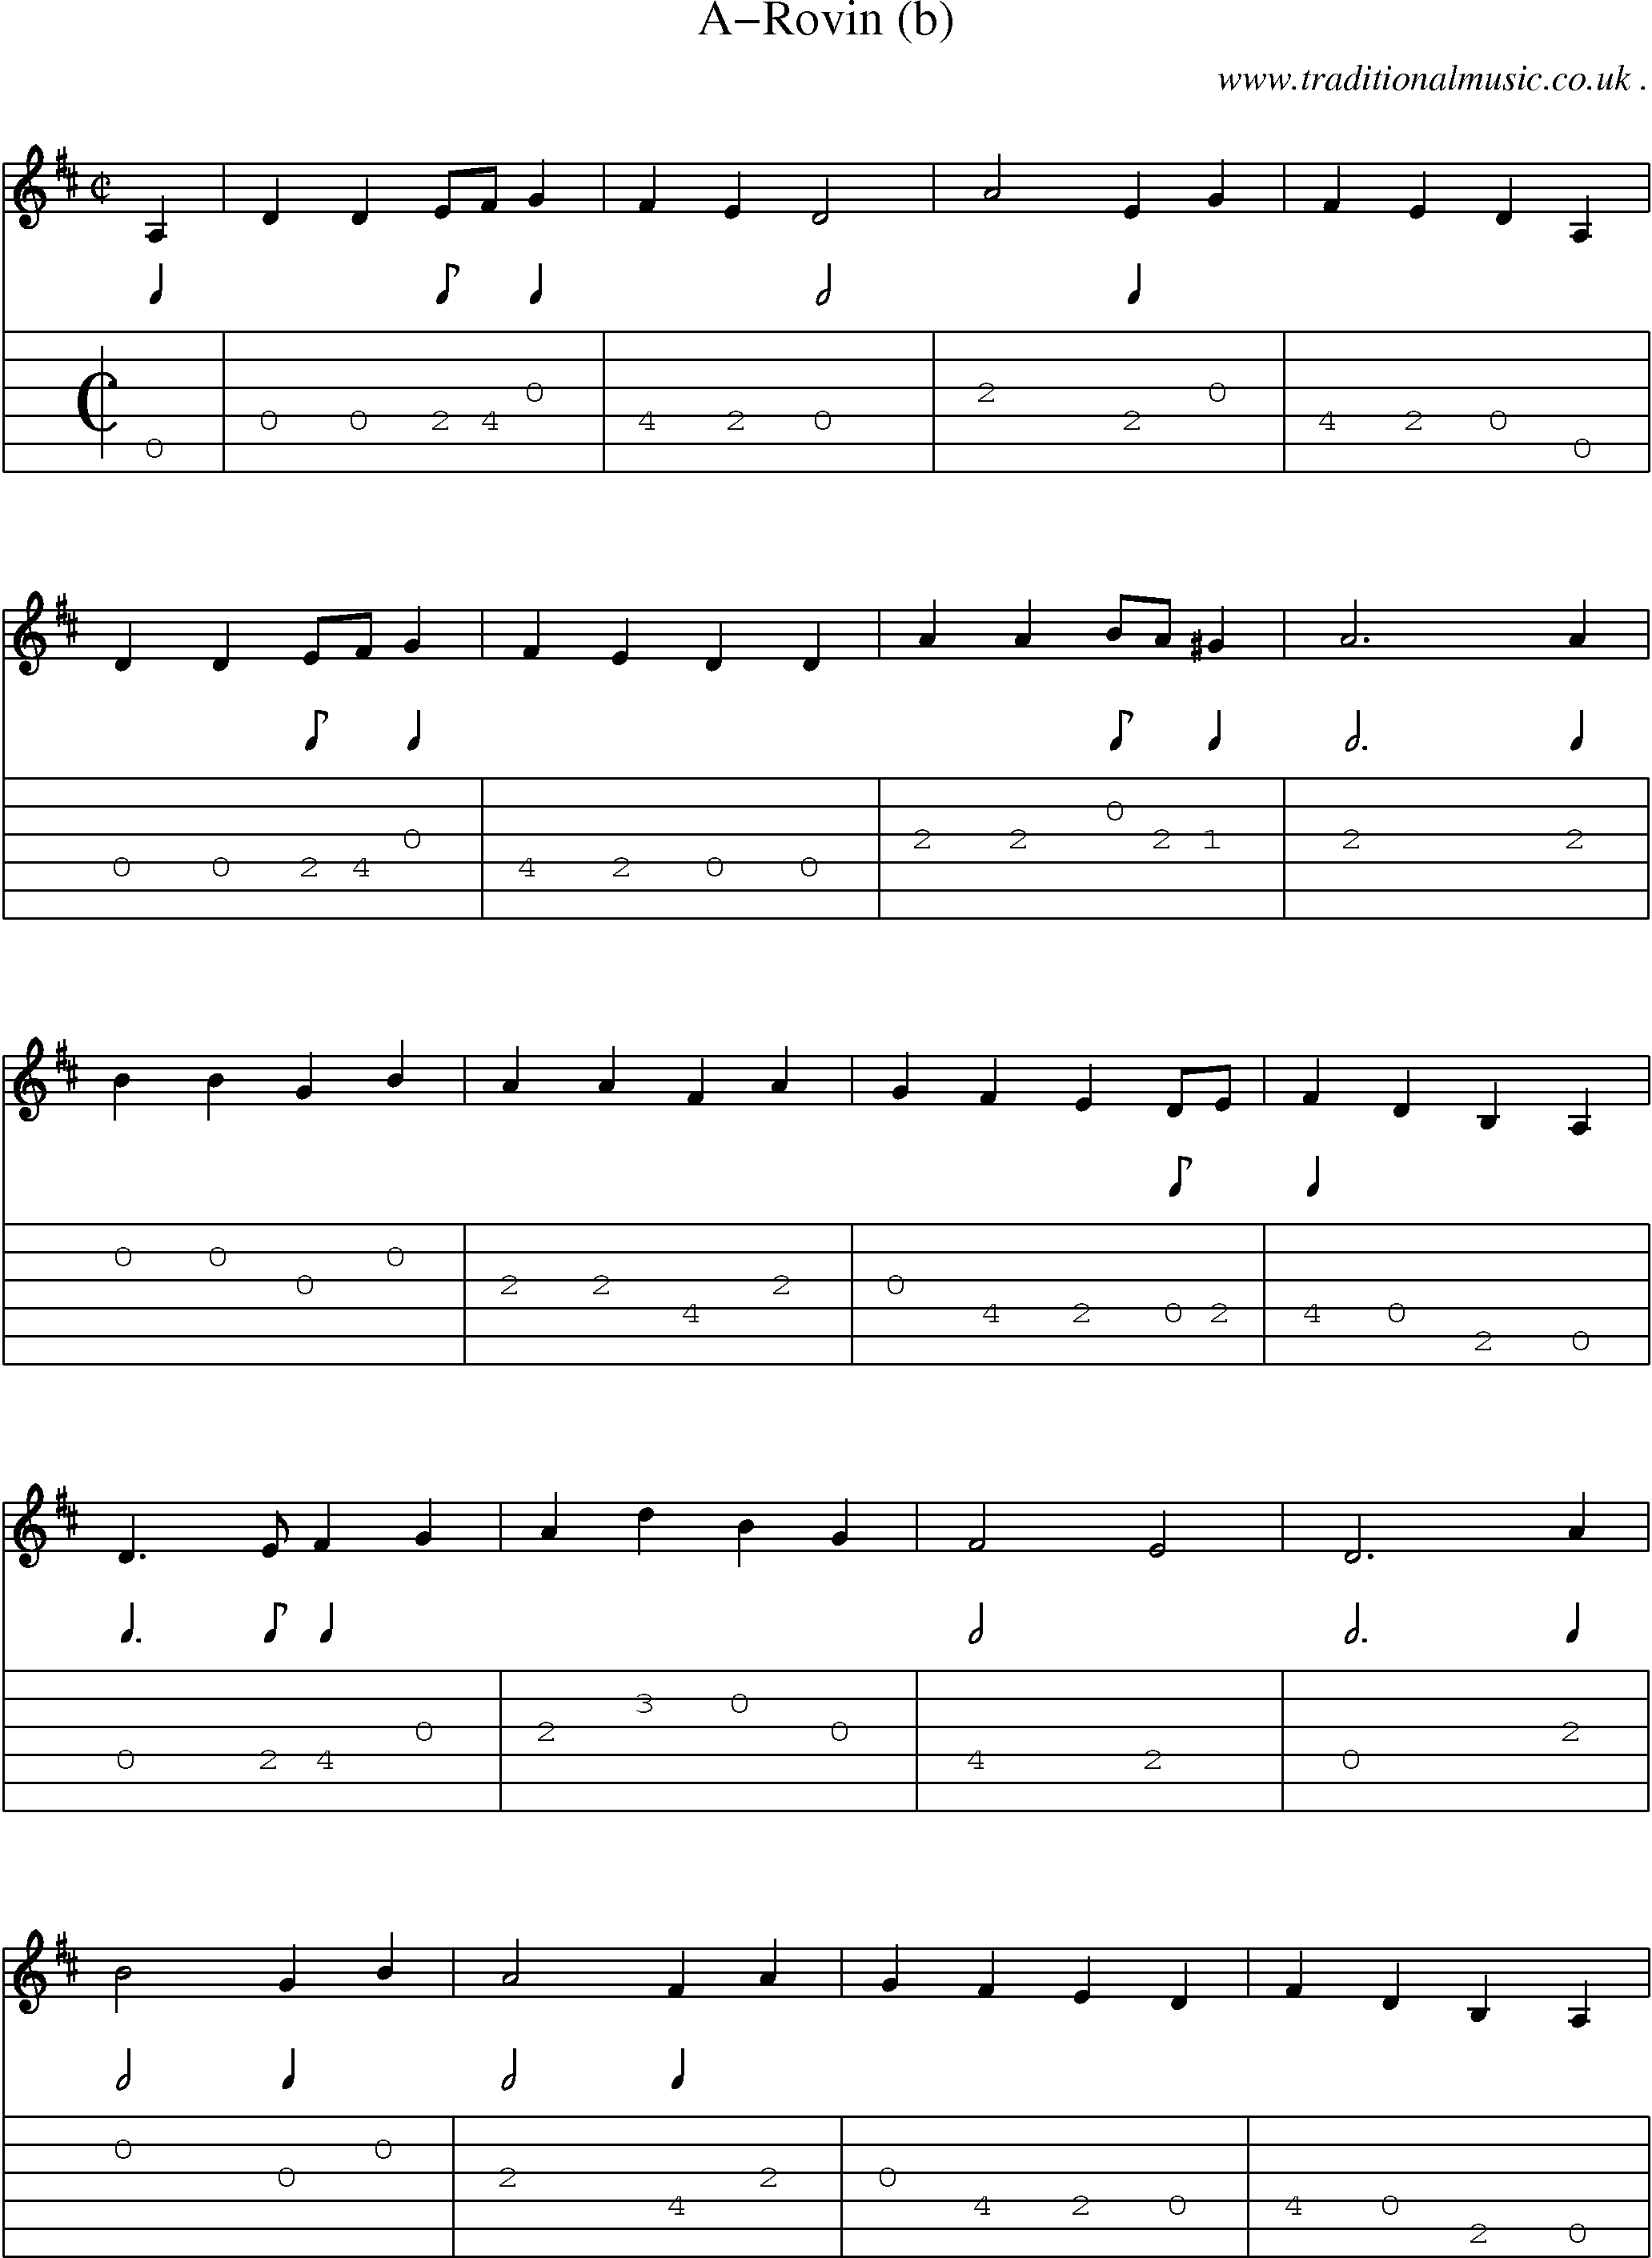 Sheet-Music and Guitar Tabs for A-rovin (b)